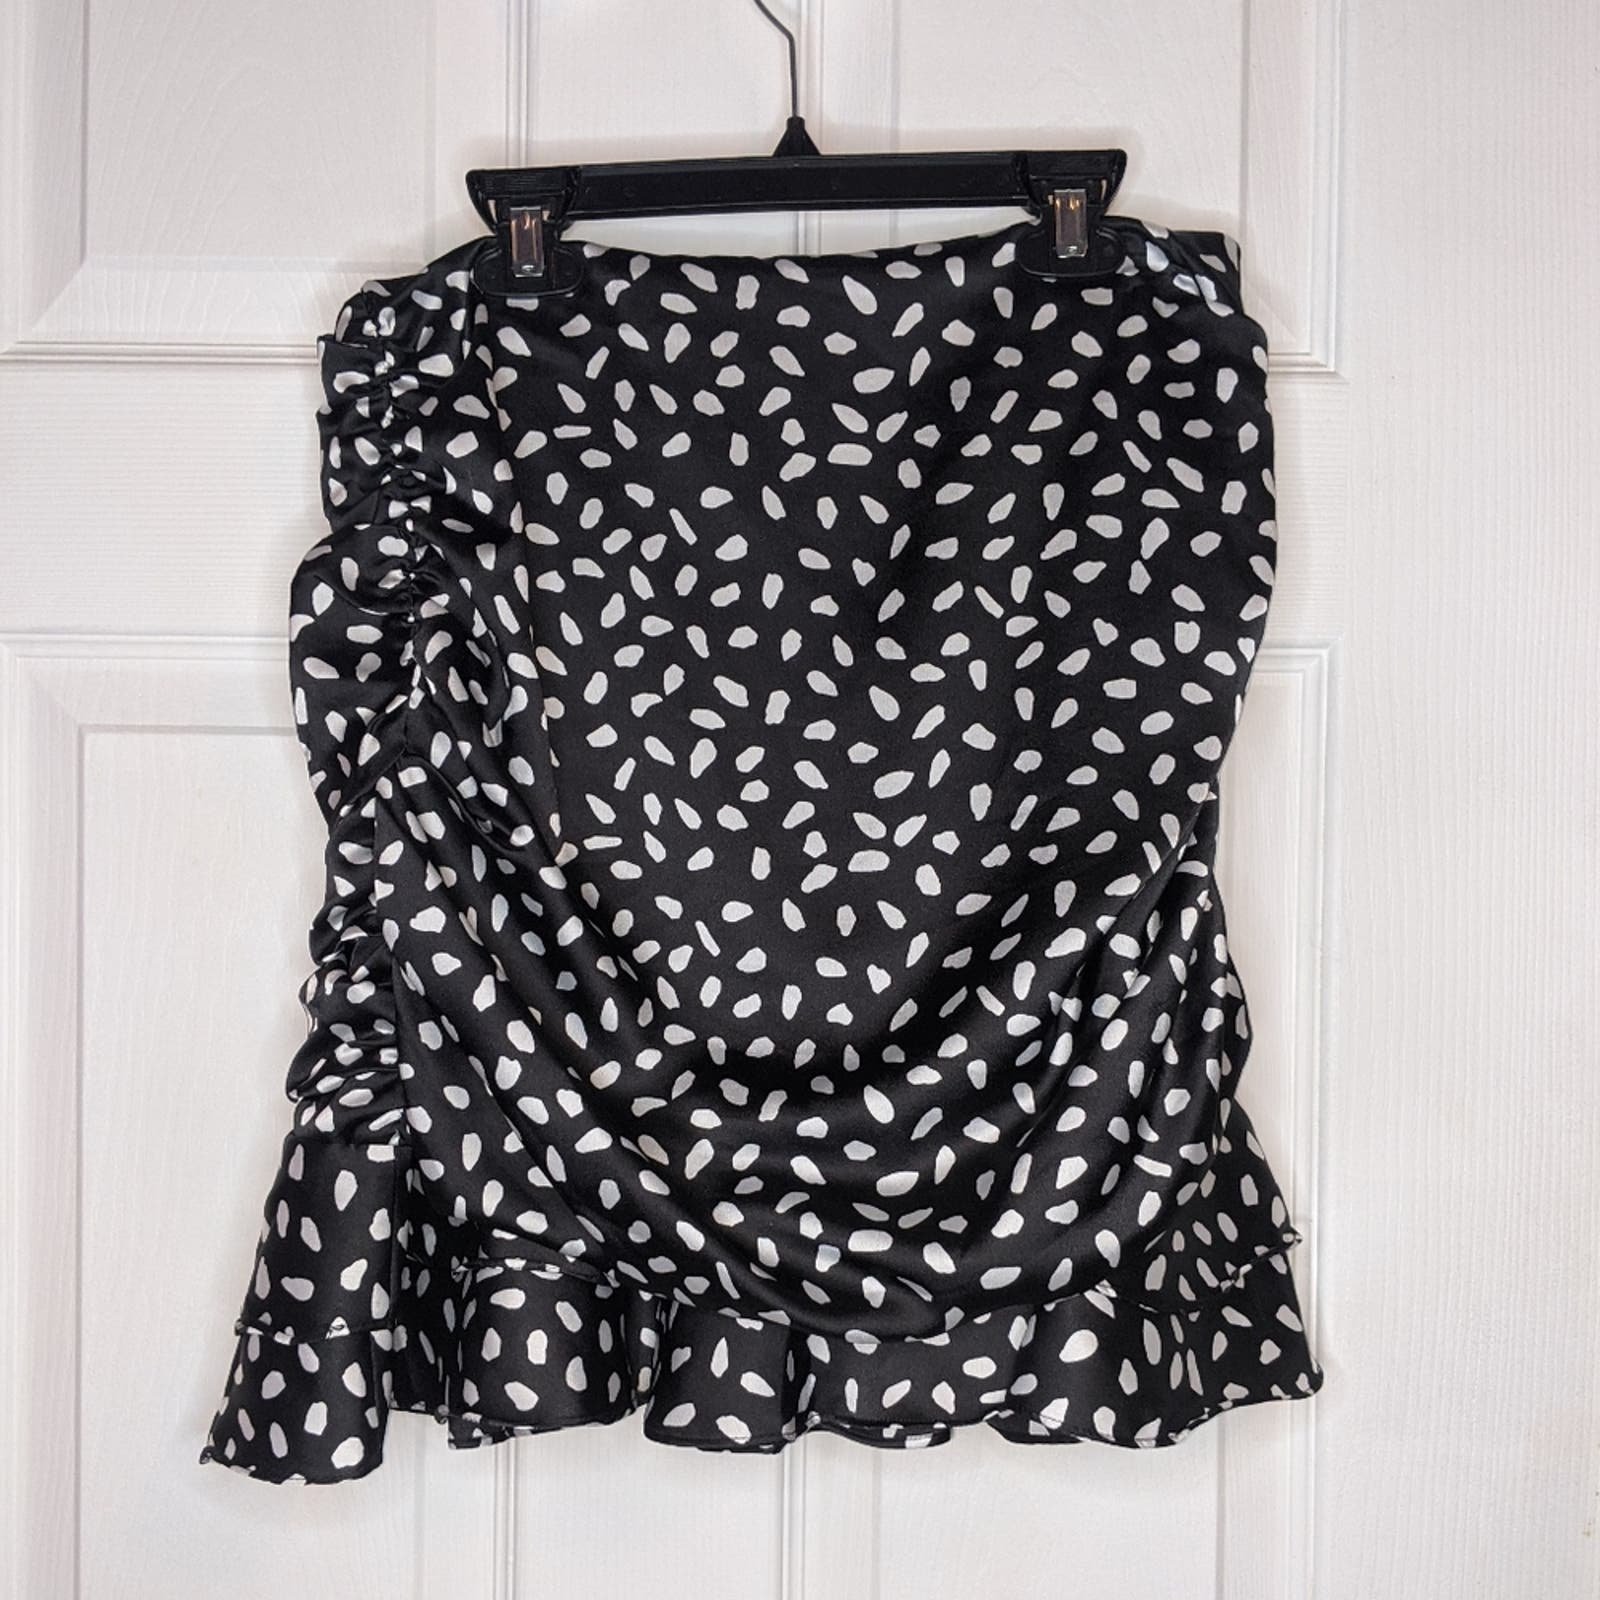 Custom Leche Black & White Polka Dot Pattern Ruched Ruffle Trim Skirt L m2bIsK7un Everyday Low Prices